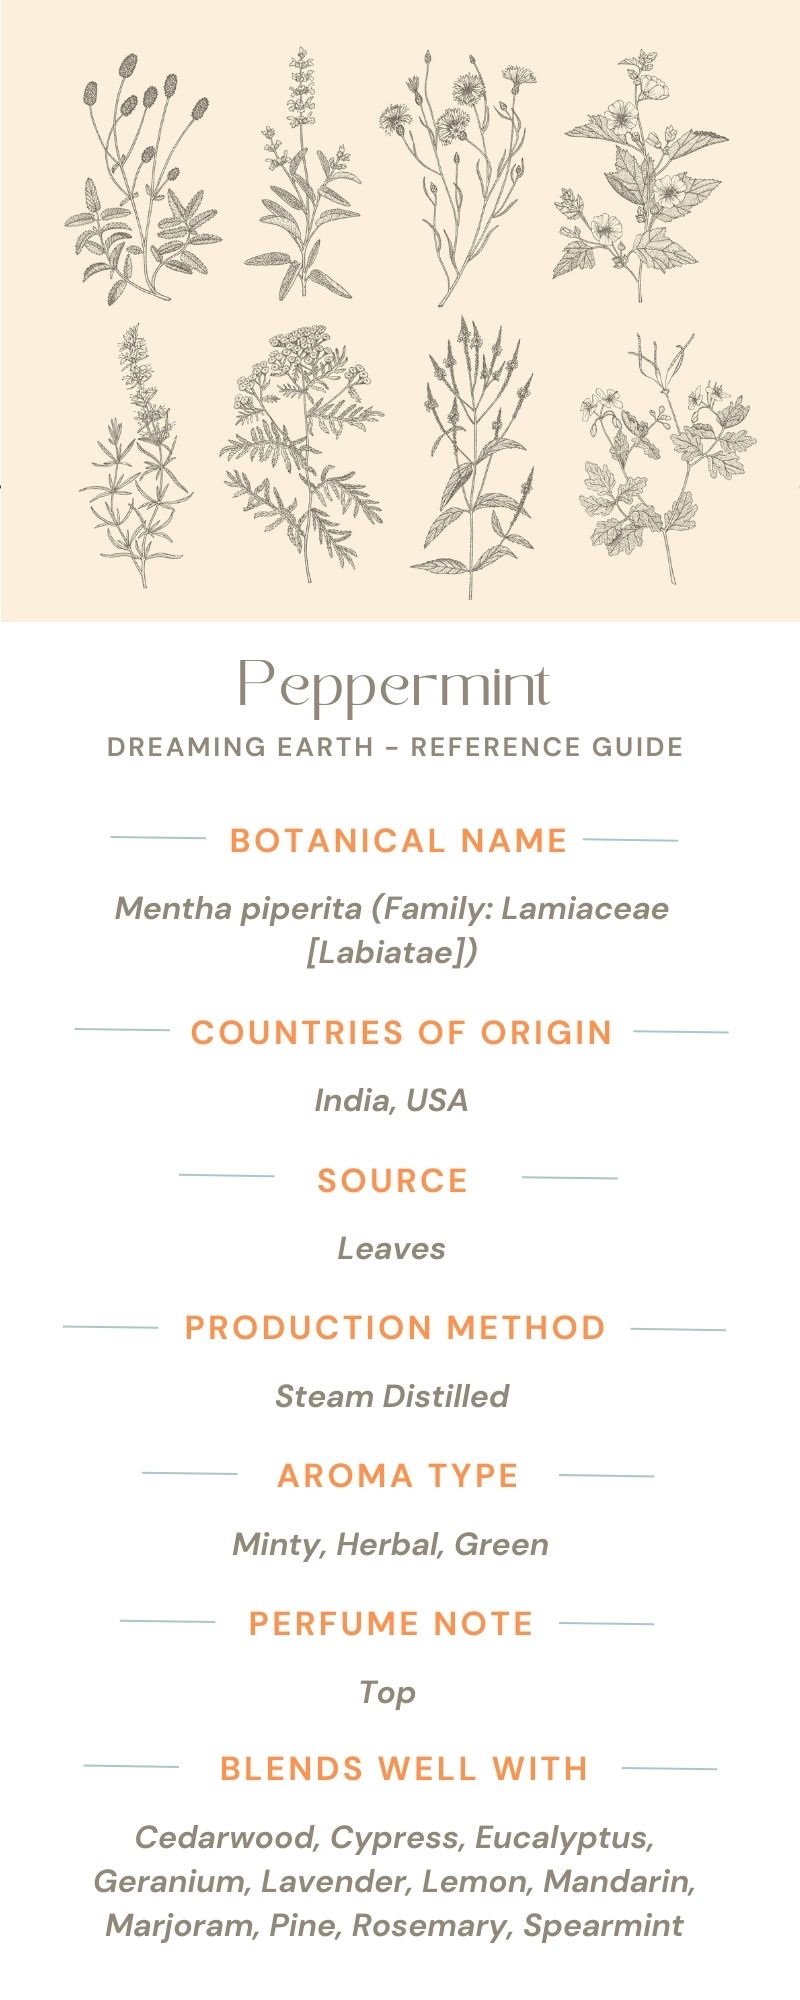 Load image into Gallery viewer, Peppermint - Organic Essential Oil - Dreaming Earth Inc
